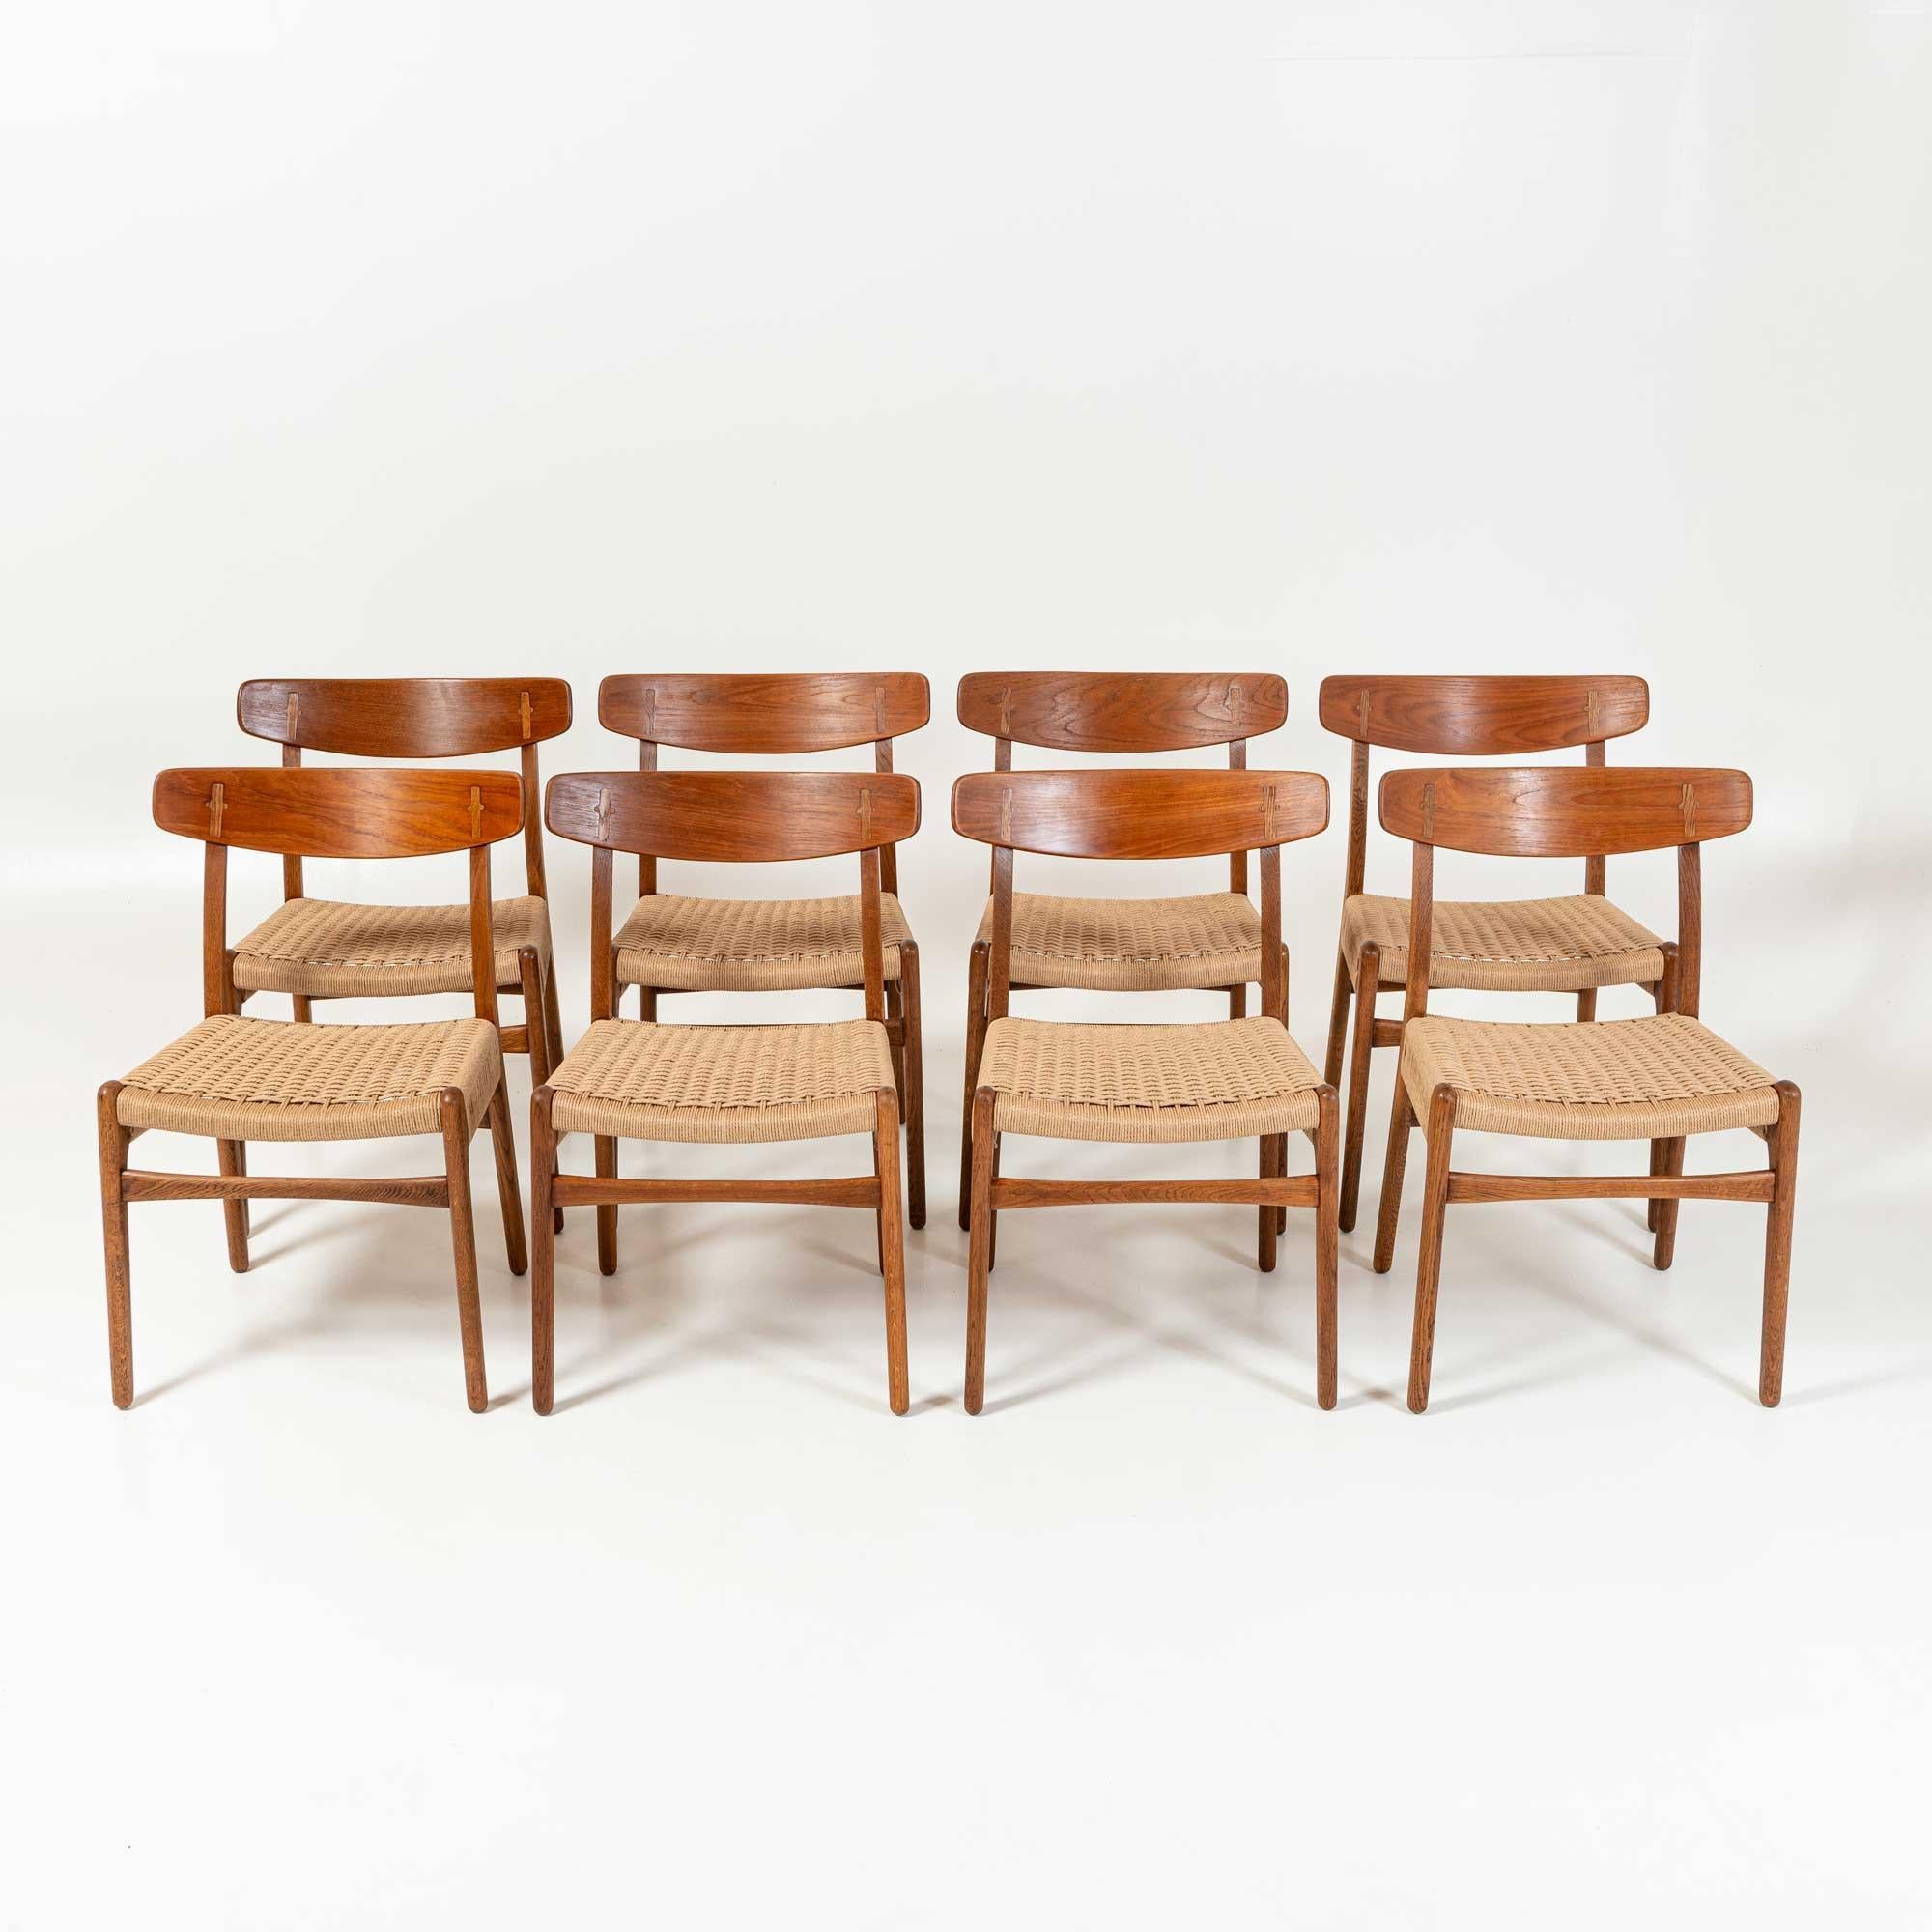 The CH23 is one of the first chairs Hans J. Wegner exclusively designed for Carl Hansen & Søn in 1950. This simplistic chair actually incorporates many sophisticated details, such as the cruciform cover caps in the backrest, a double-woven seat, and